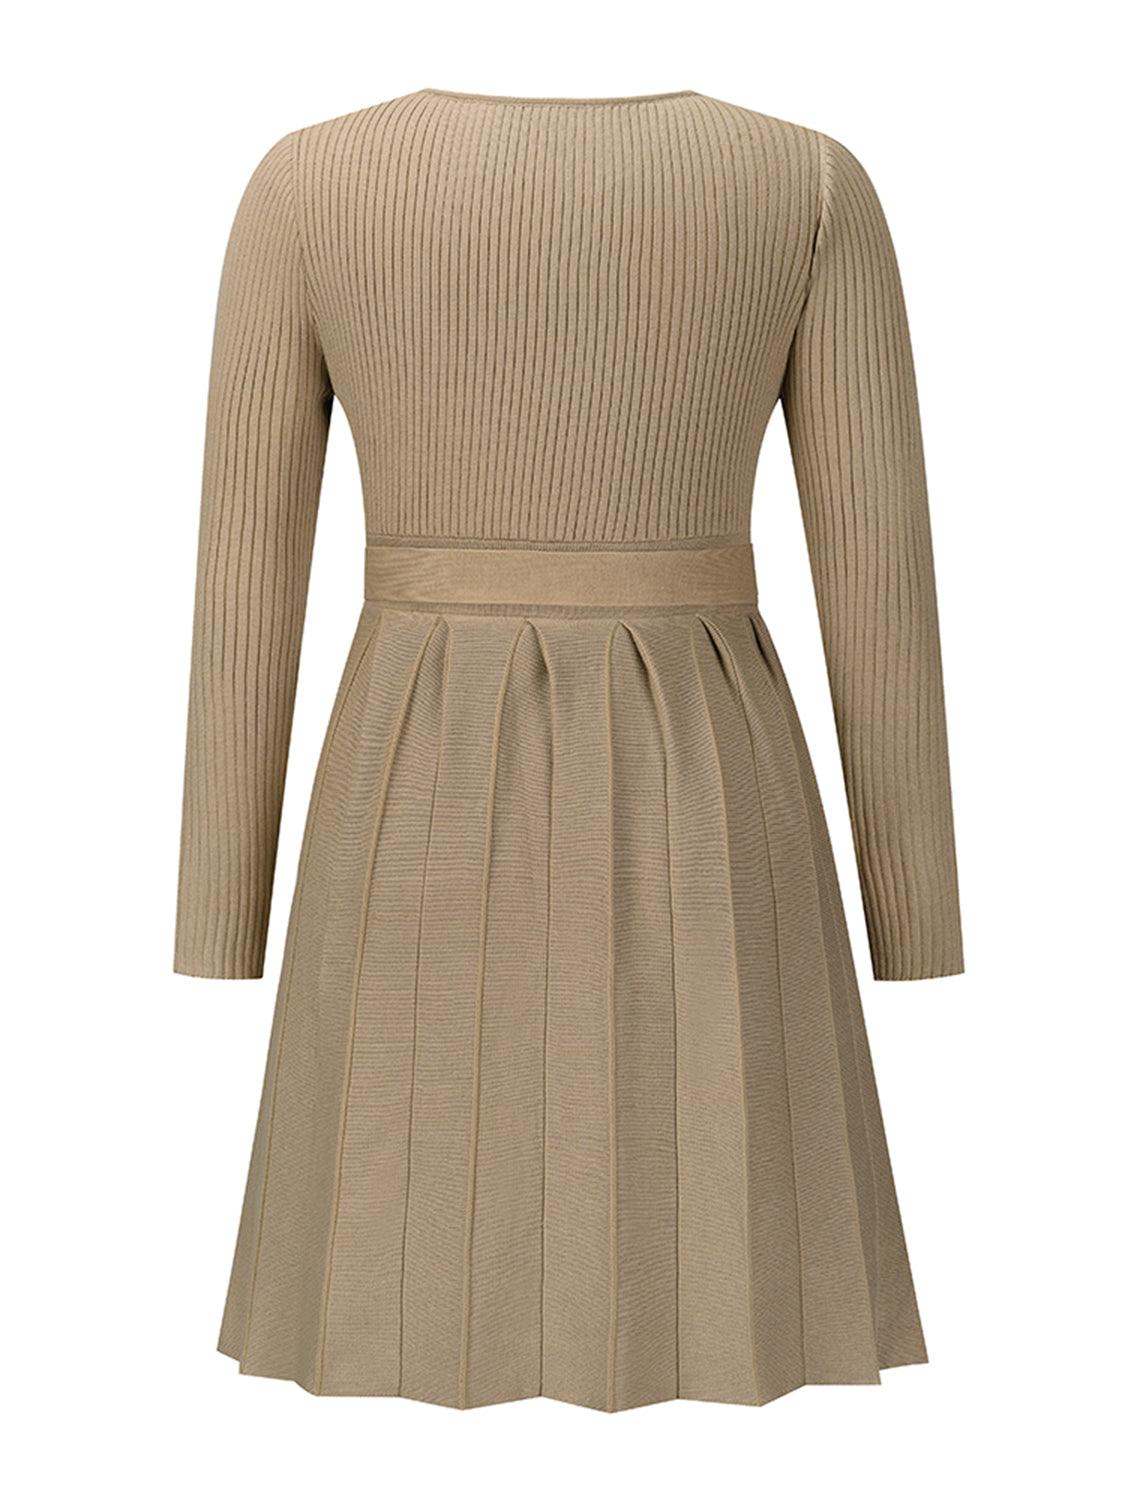 Surplice Neck Tie Front Pleated Sweater Dress - Lab Fashion, Home & Health